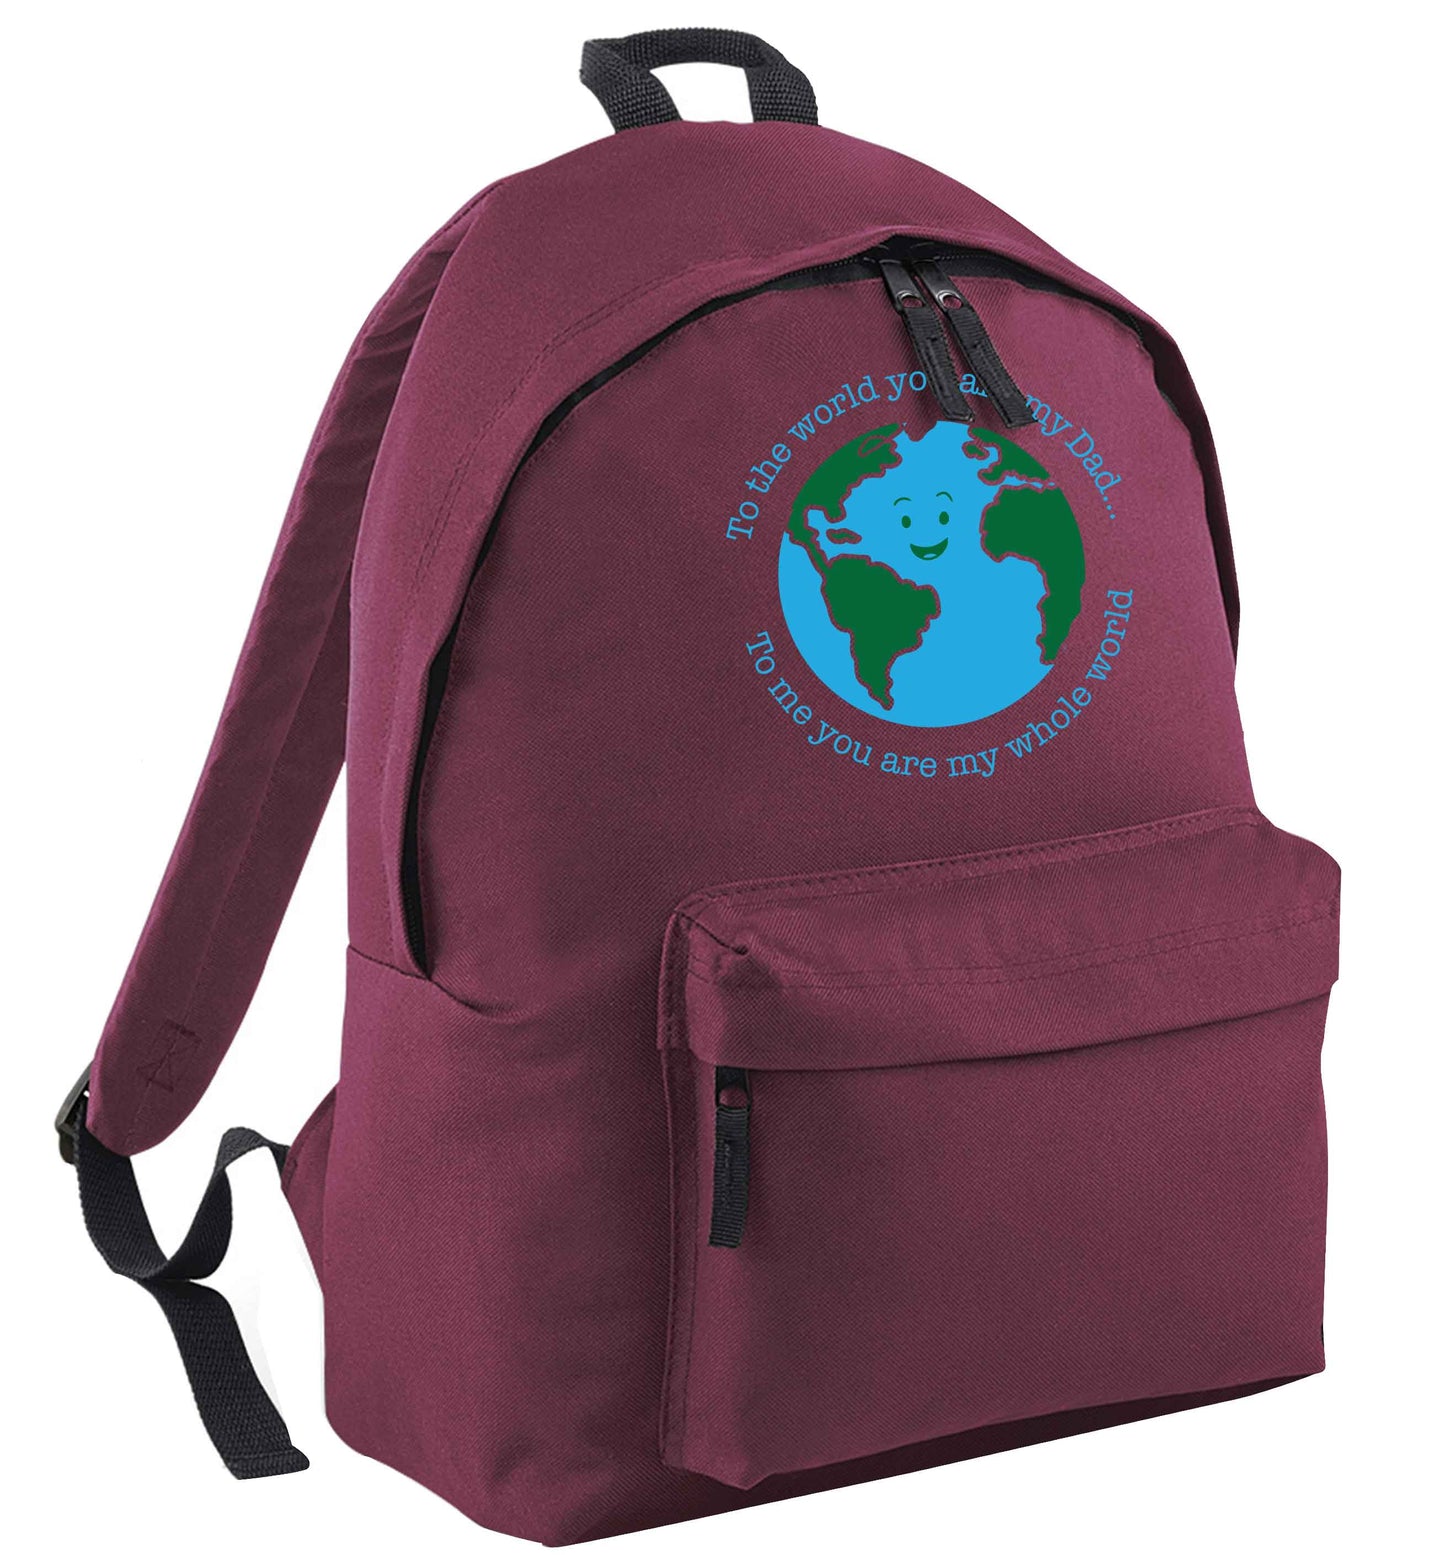 To the world you are my dad, to me you are my whole world maroon adults backpack